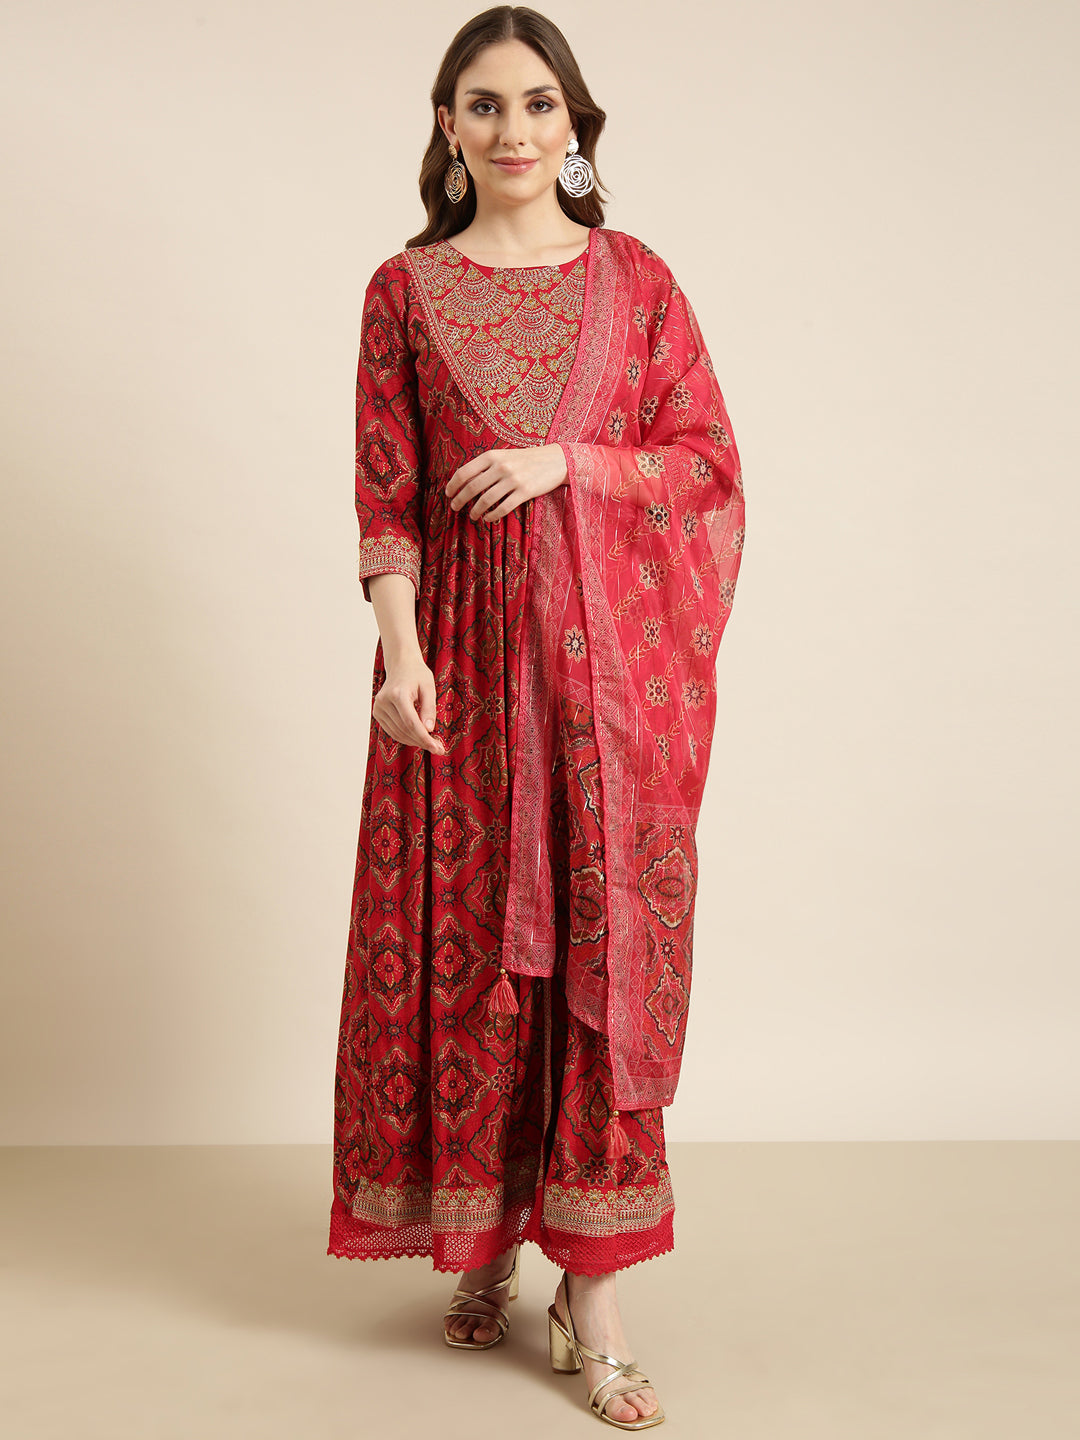 Women Anarkali Red Ethnic Motifs Kurta and Trousers Set Comes With Dupatta and Potli Bag